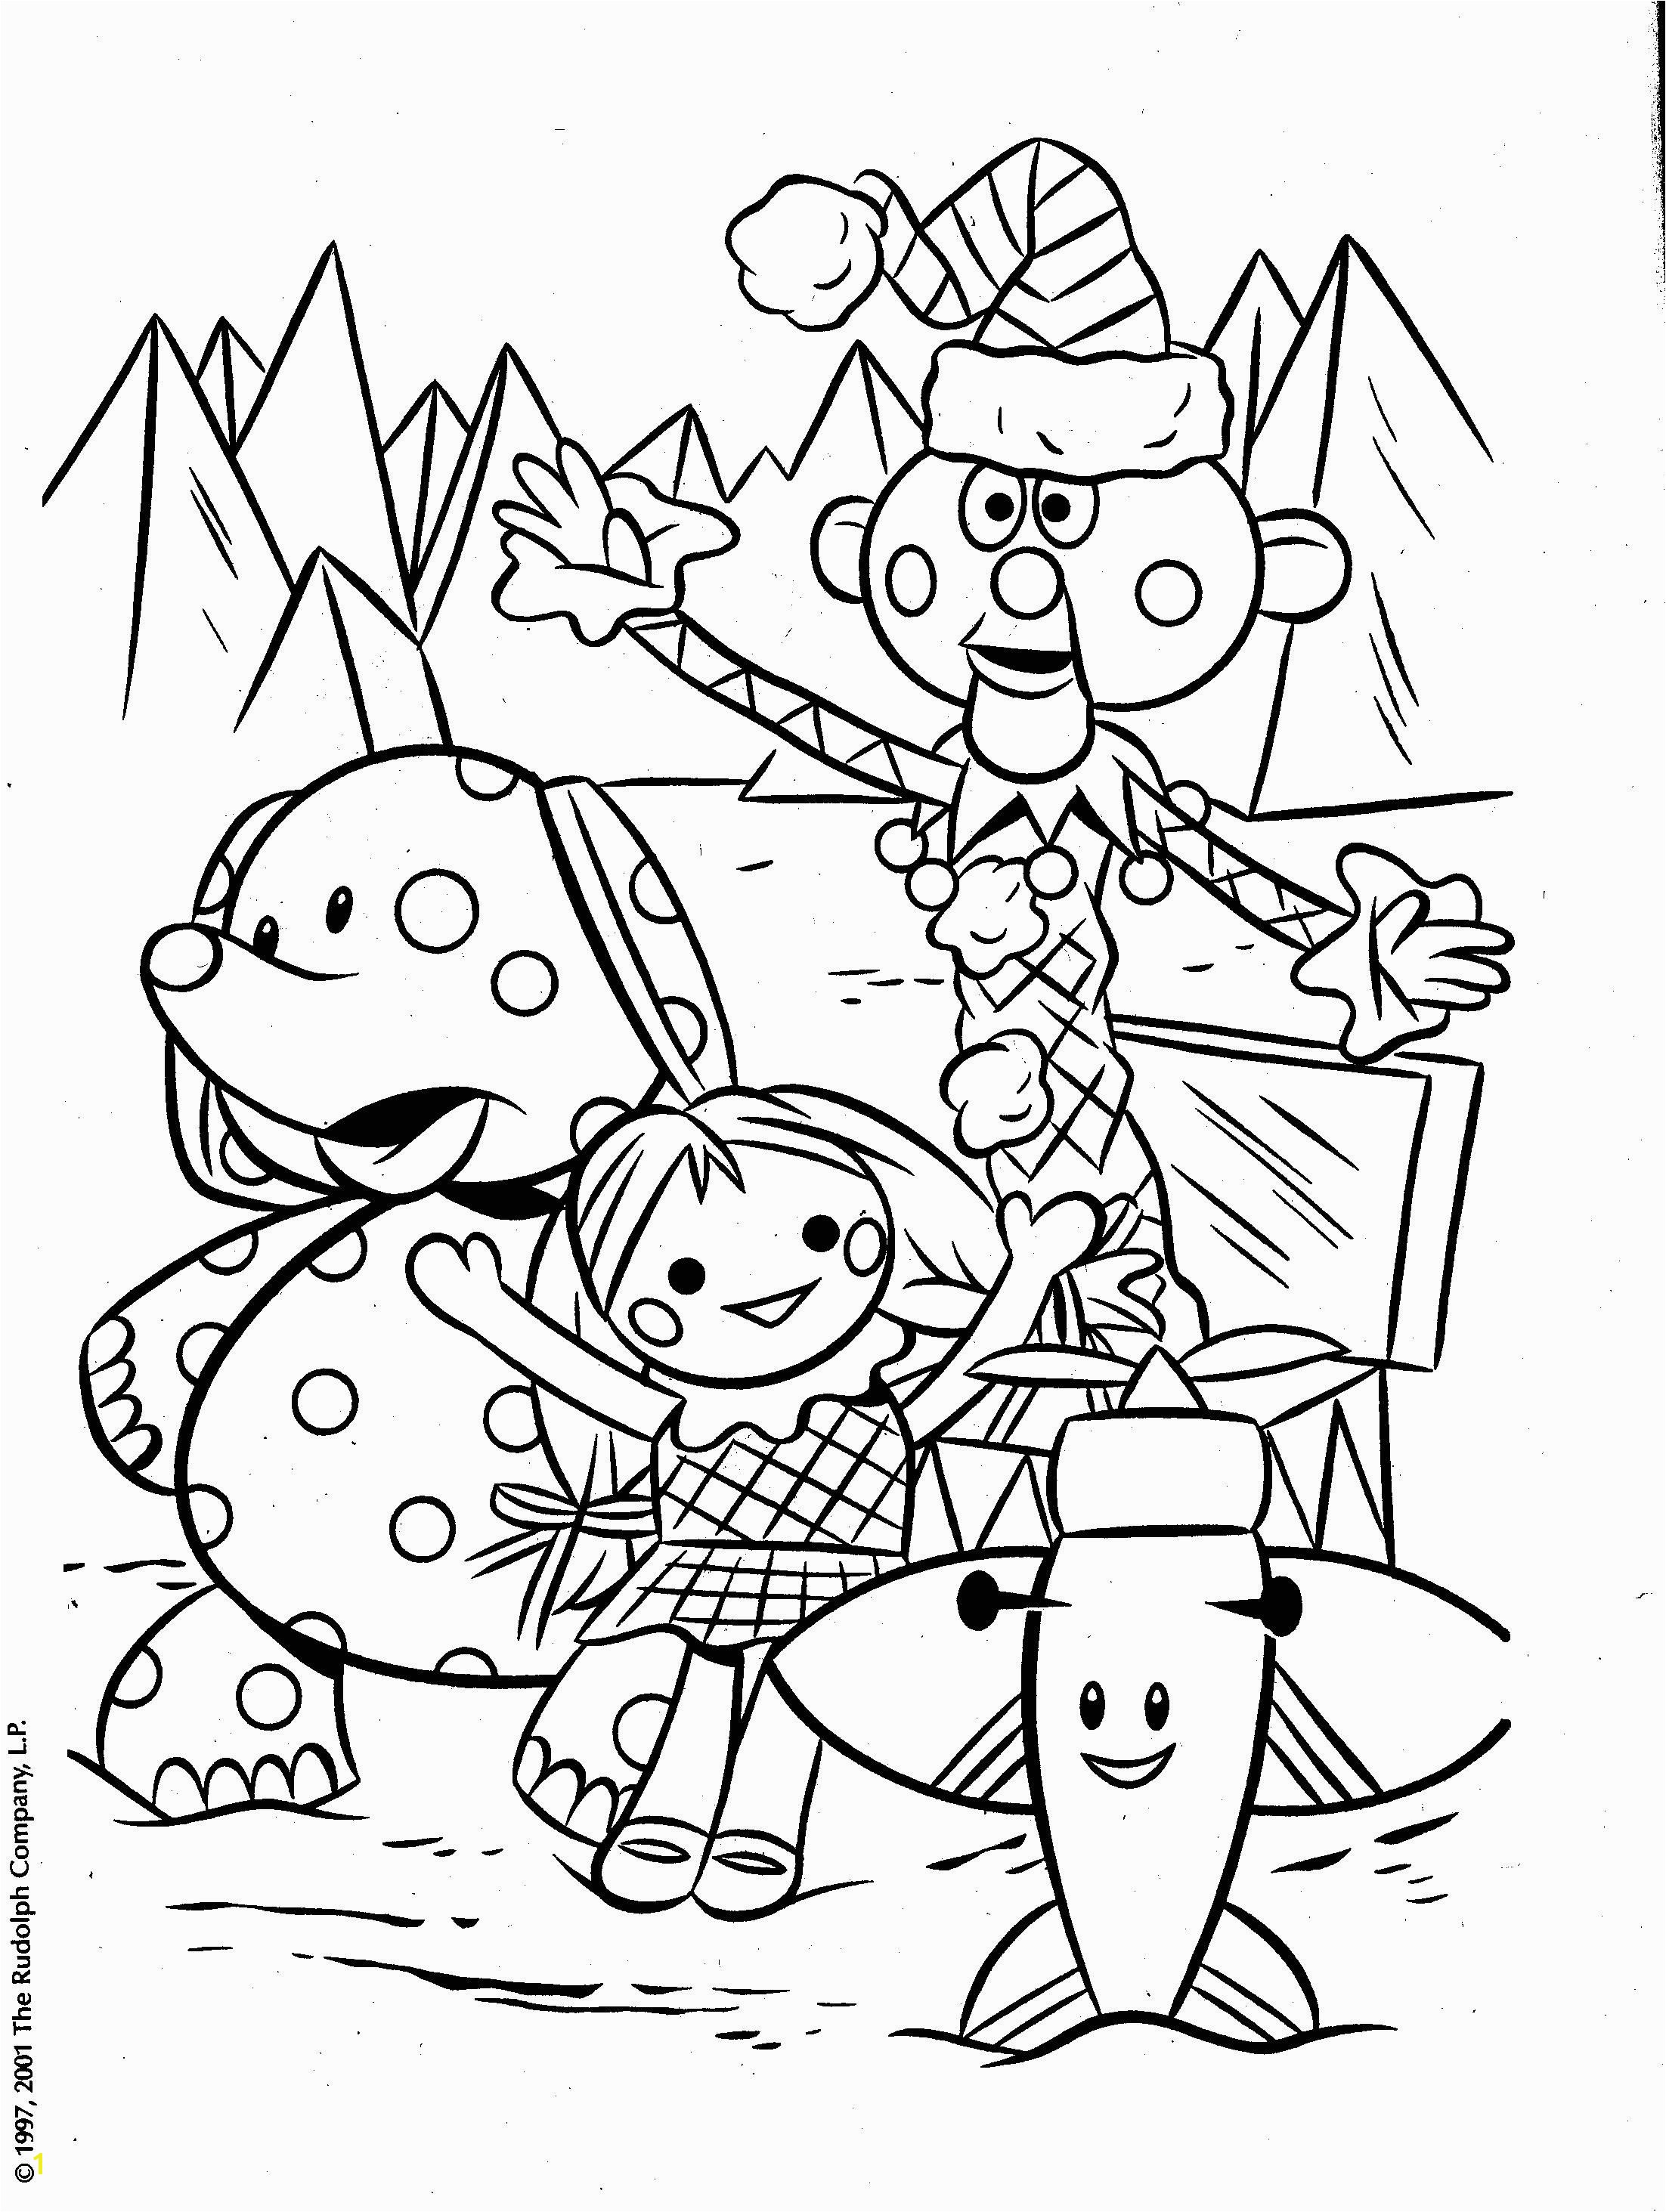 Rudolph Misfit Toys Coloring Pages